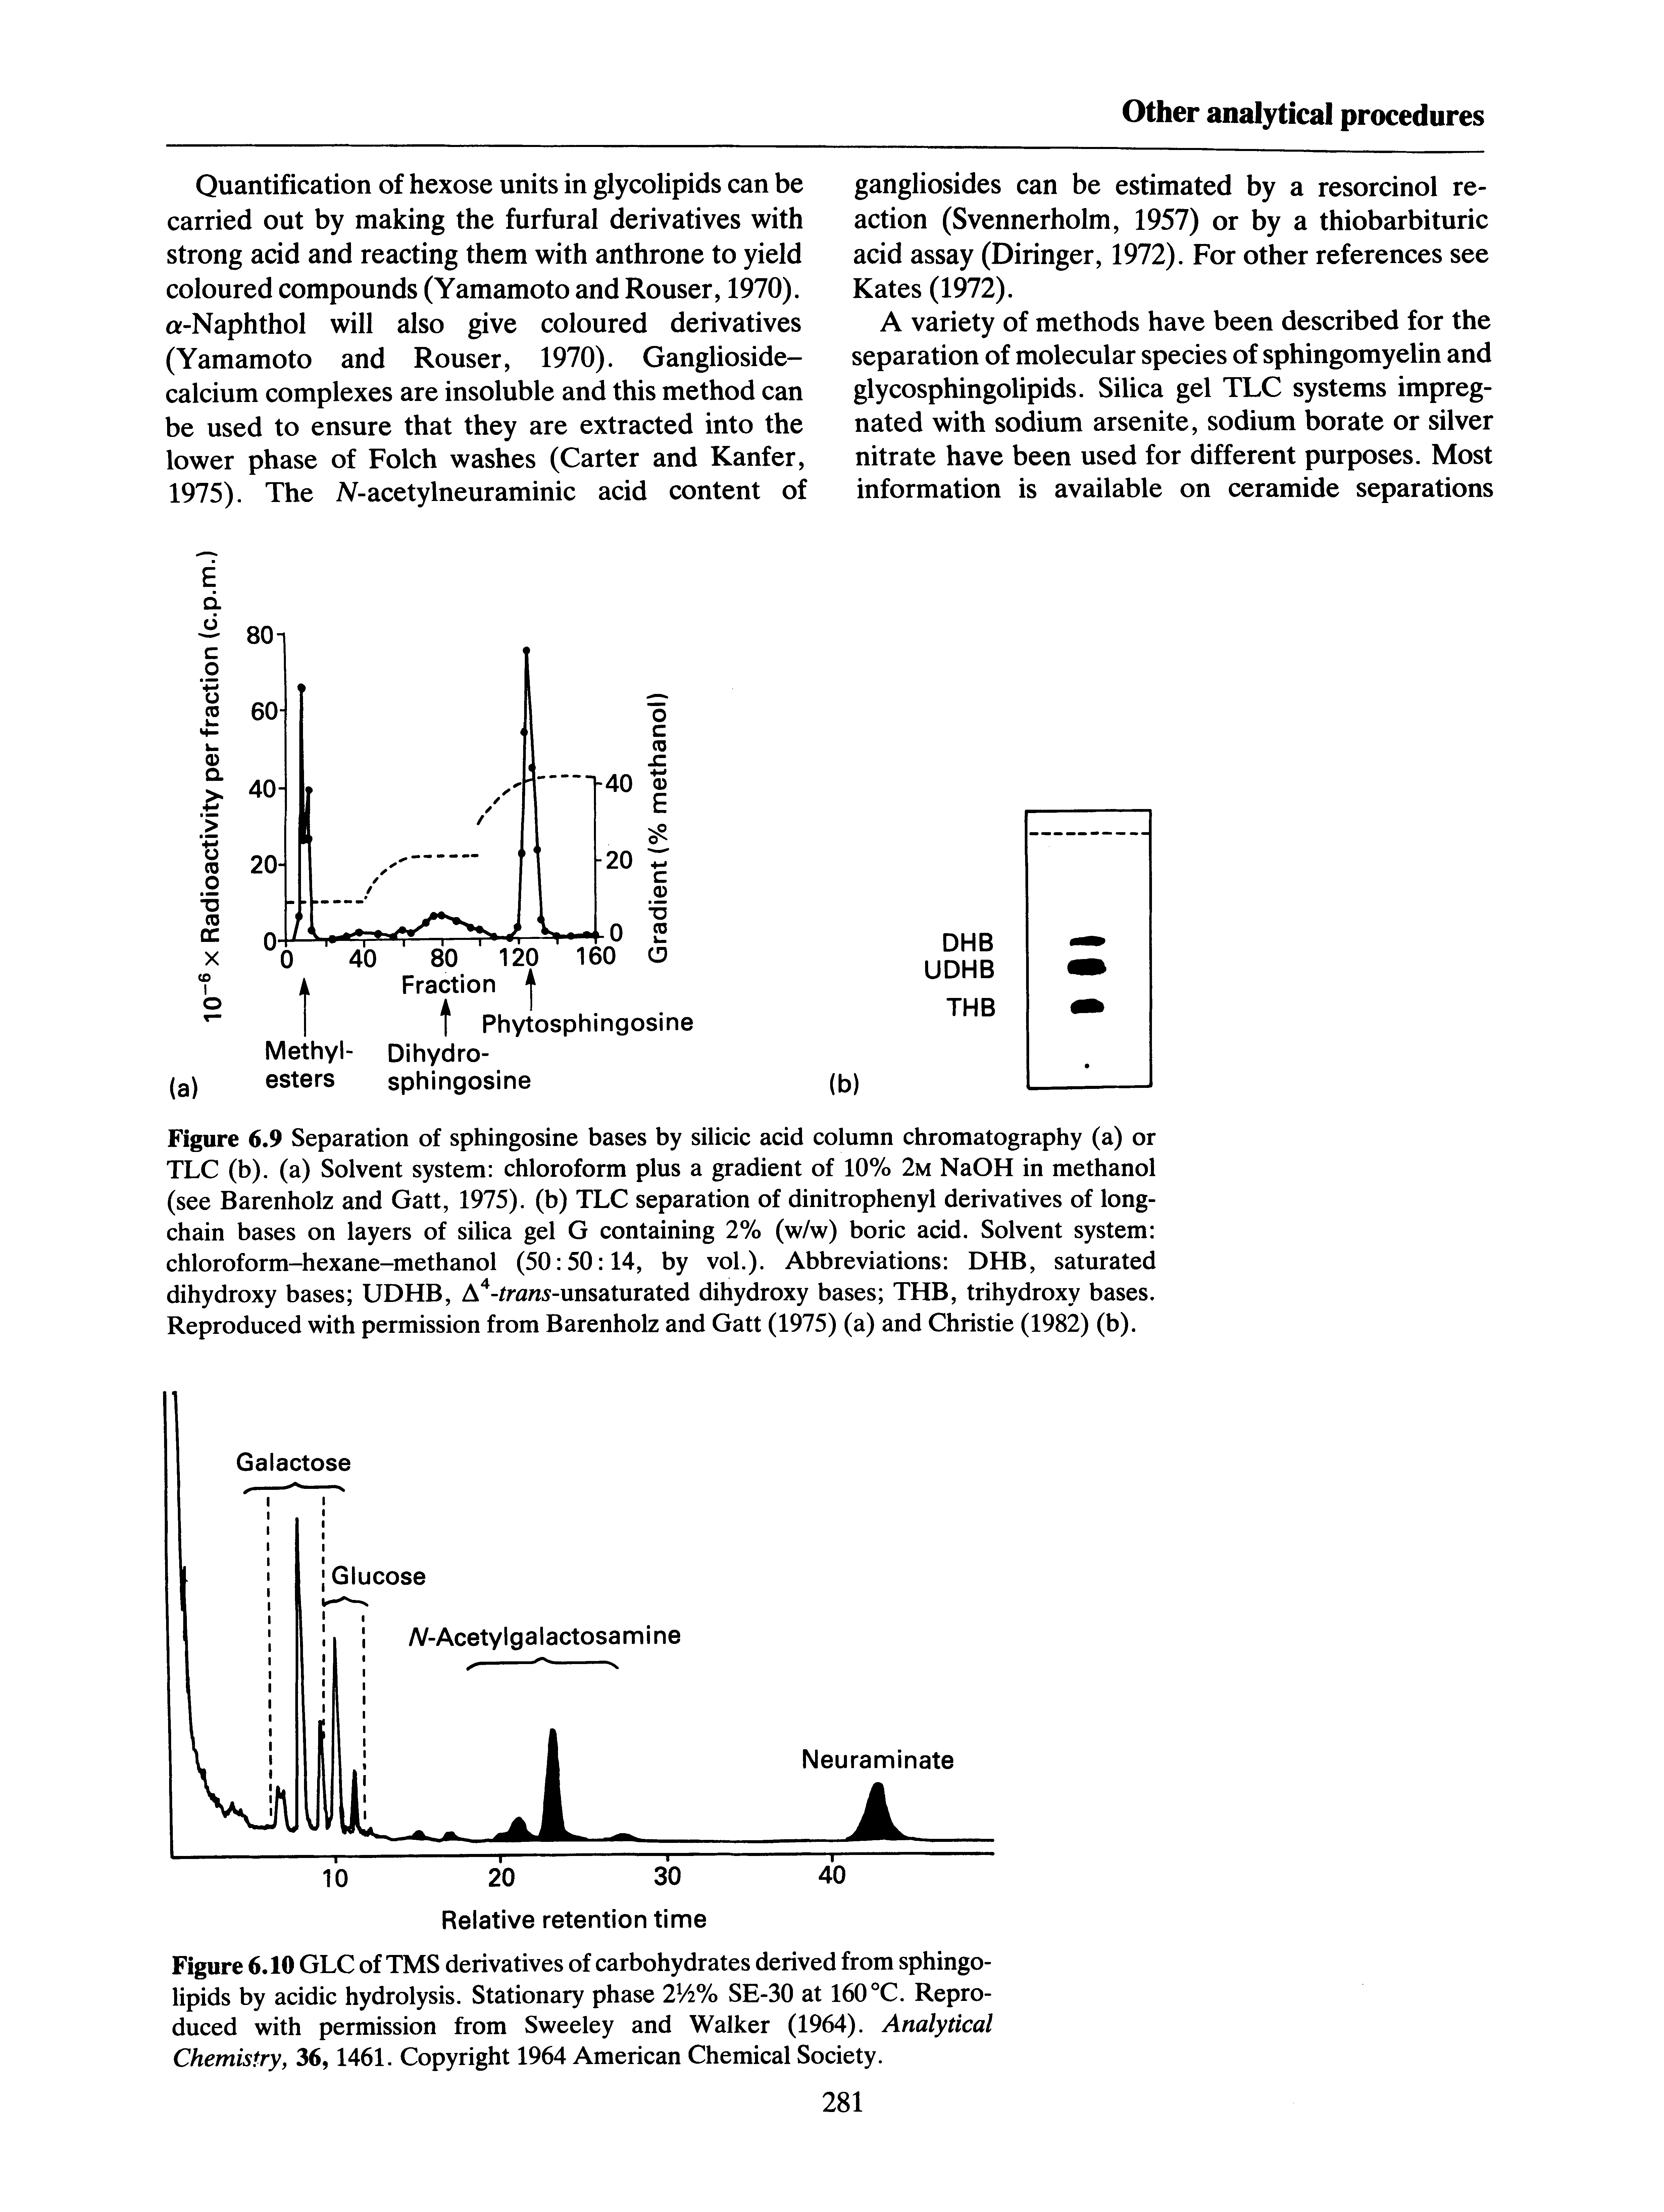 Figure 6.9 Separation of sphingosine bases by silicic acid column chromatography (a) or TLC (b). (a) Solvent system chloroform plus a gradient of 10% 2m NaOH in methanol (see Barenholz and Gatt, 1975). (b) TLC separation of dinitrophenyl derivatives of long-chain bases on layers of silica gel G containing 2% (w/w) boric acid. Solvent system chloroform-hexane-methanol (50 50 14, by vol.). Abbreviations DHB, saturated dihydroxy bases UDHB, A -fran -unsaturated dihydroxy bases THB, trihydroxy bases. Reproduced with permission from Barenholz and Gatt (1975) (a) and Christie (1982) (b).